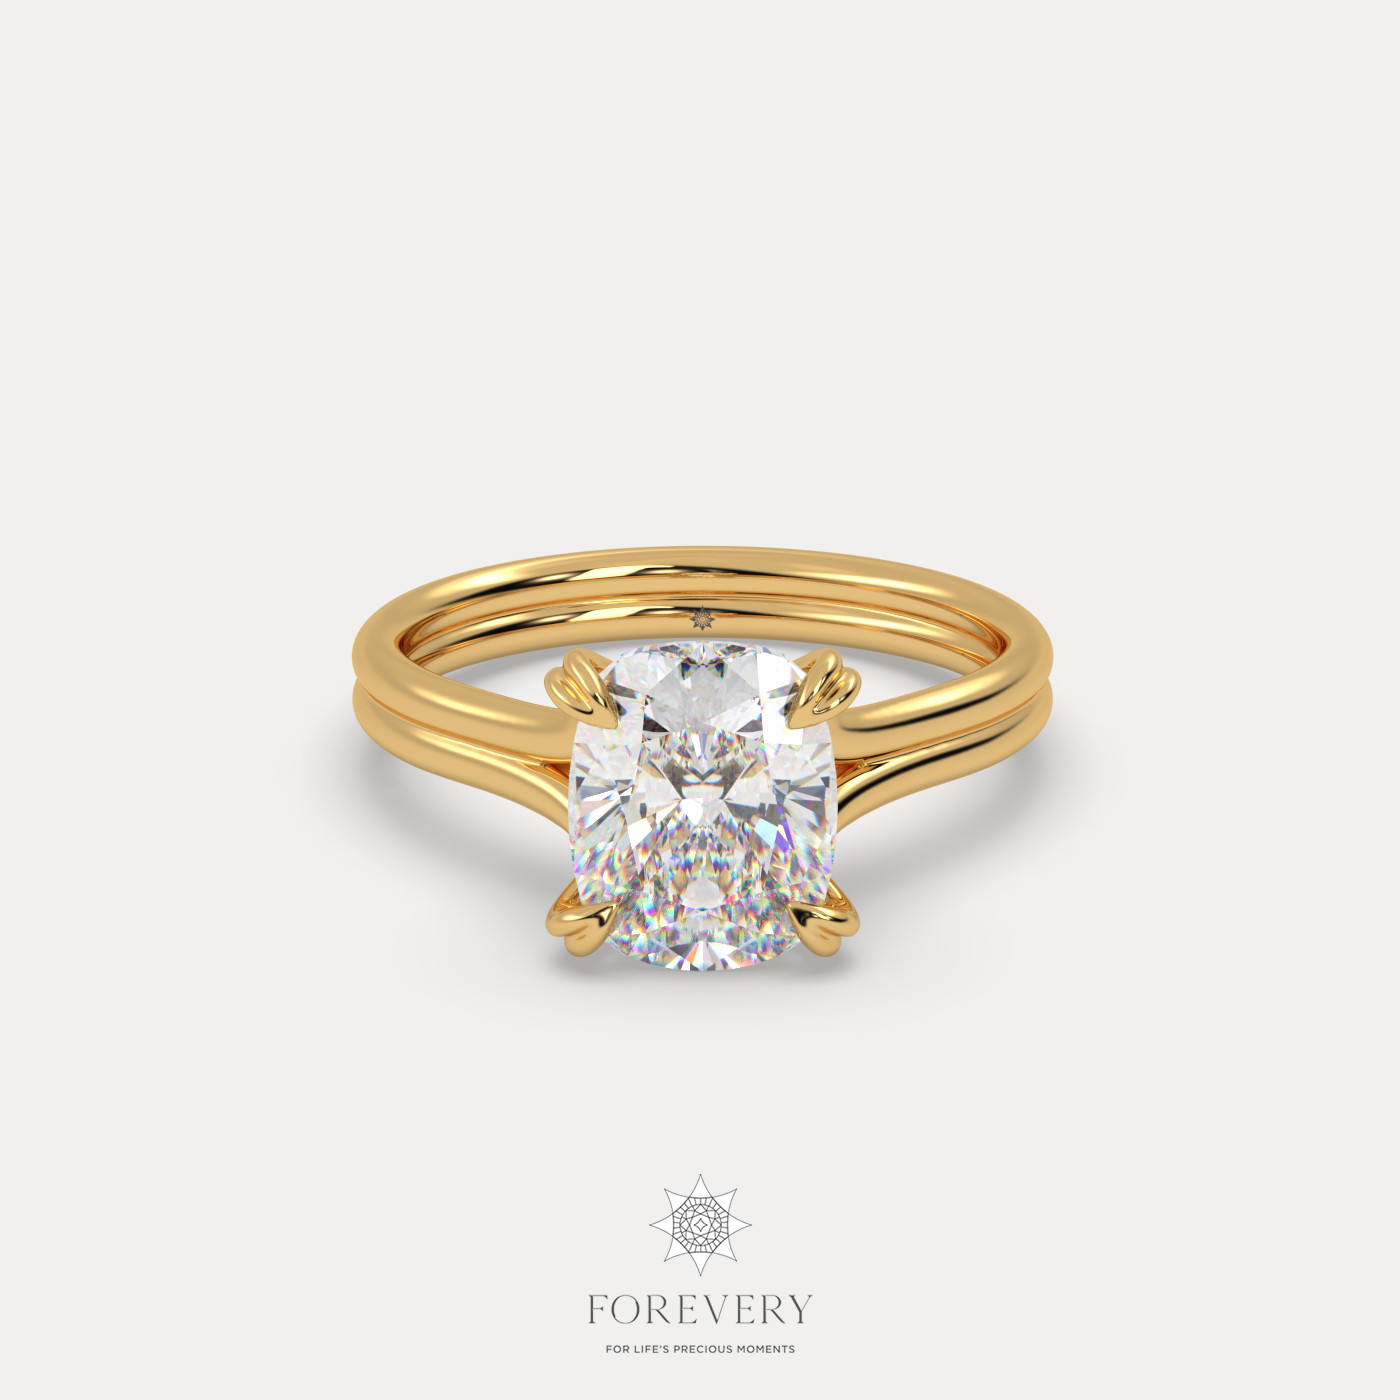 18K YELLOW GOLD Cushion Cut Diamond Solitaire Engagament Ring